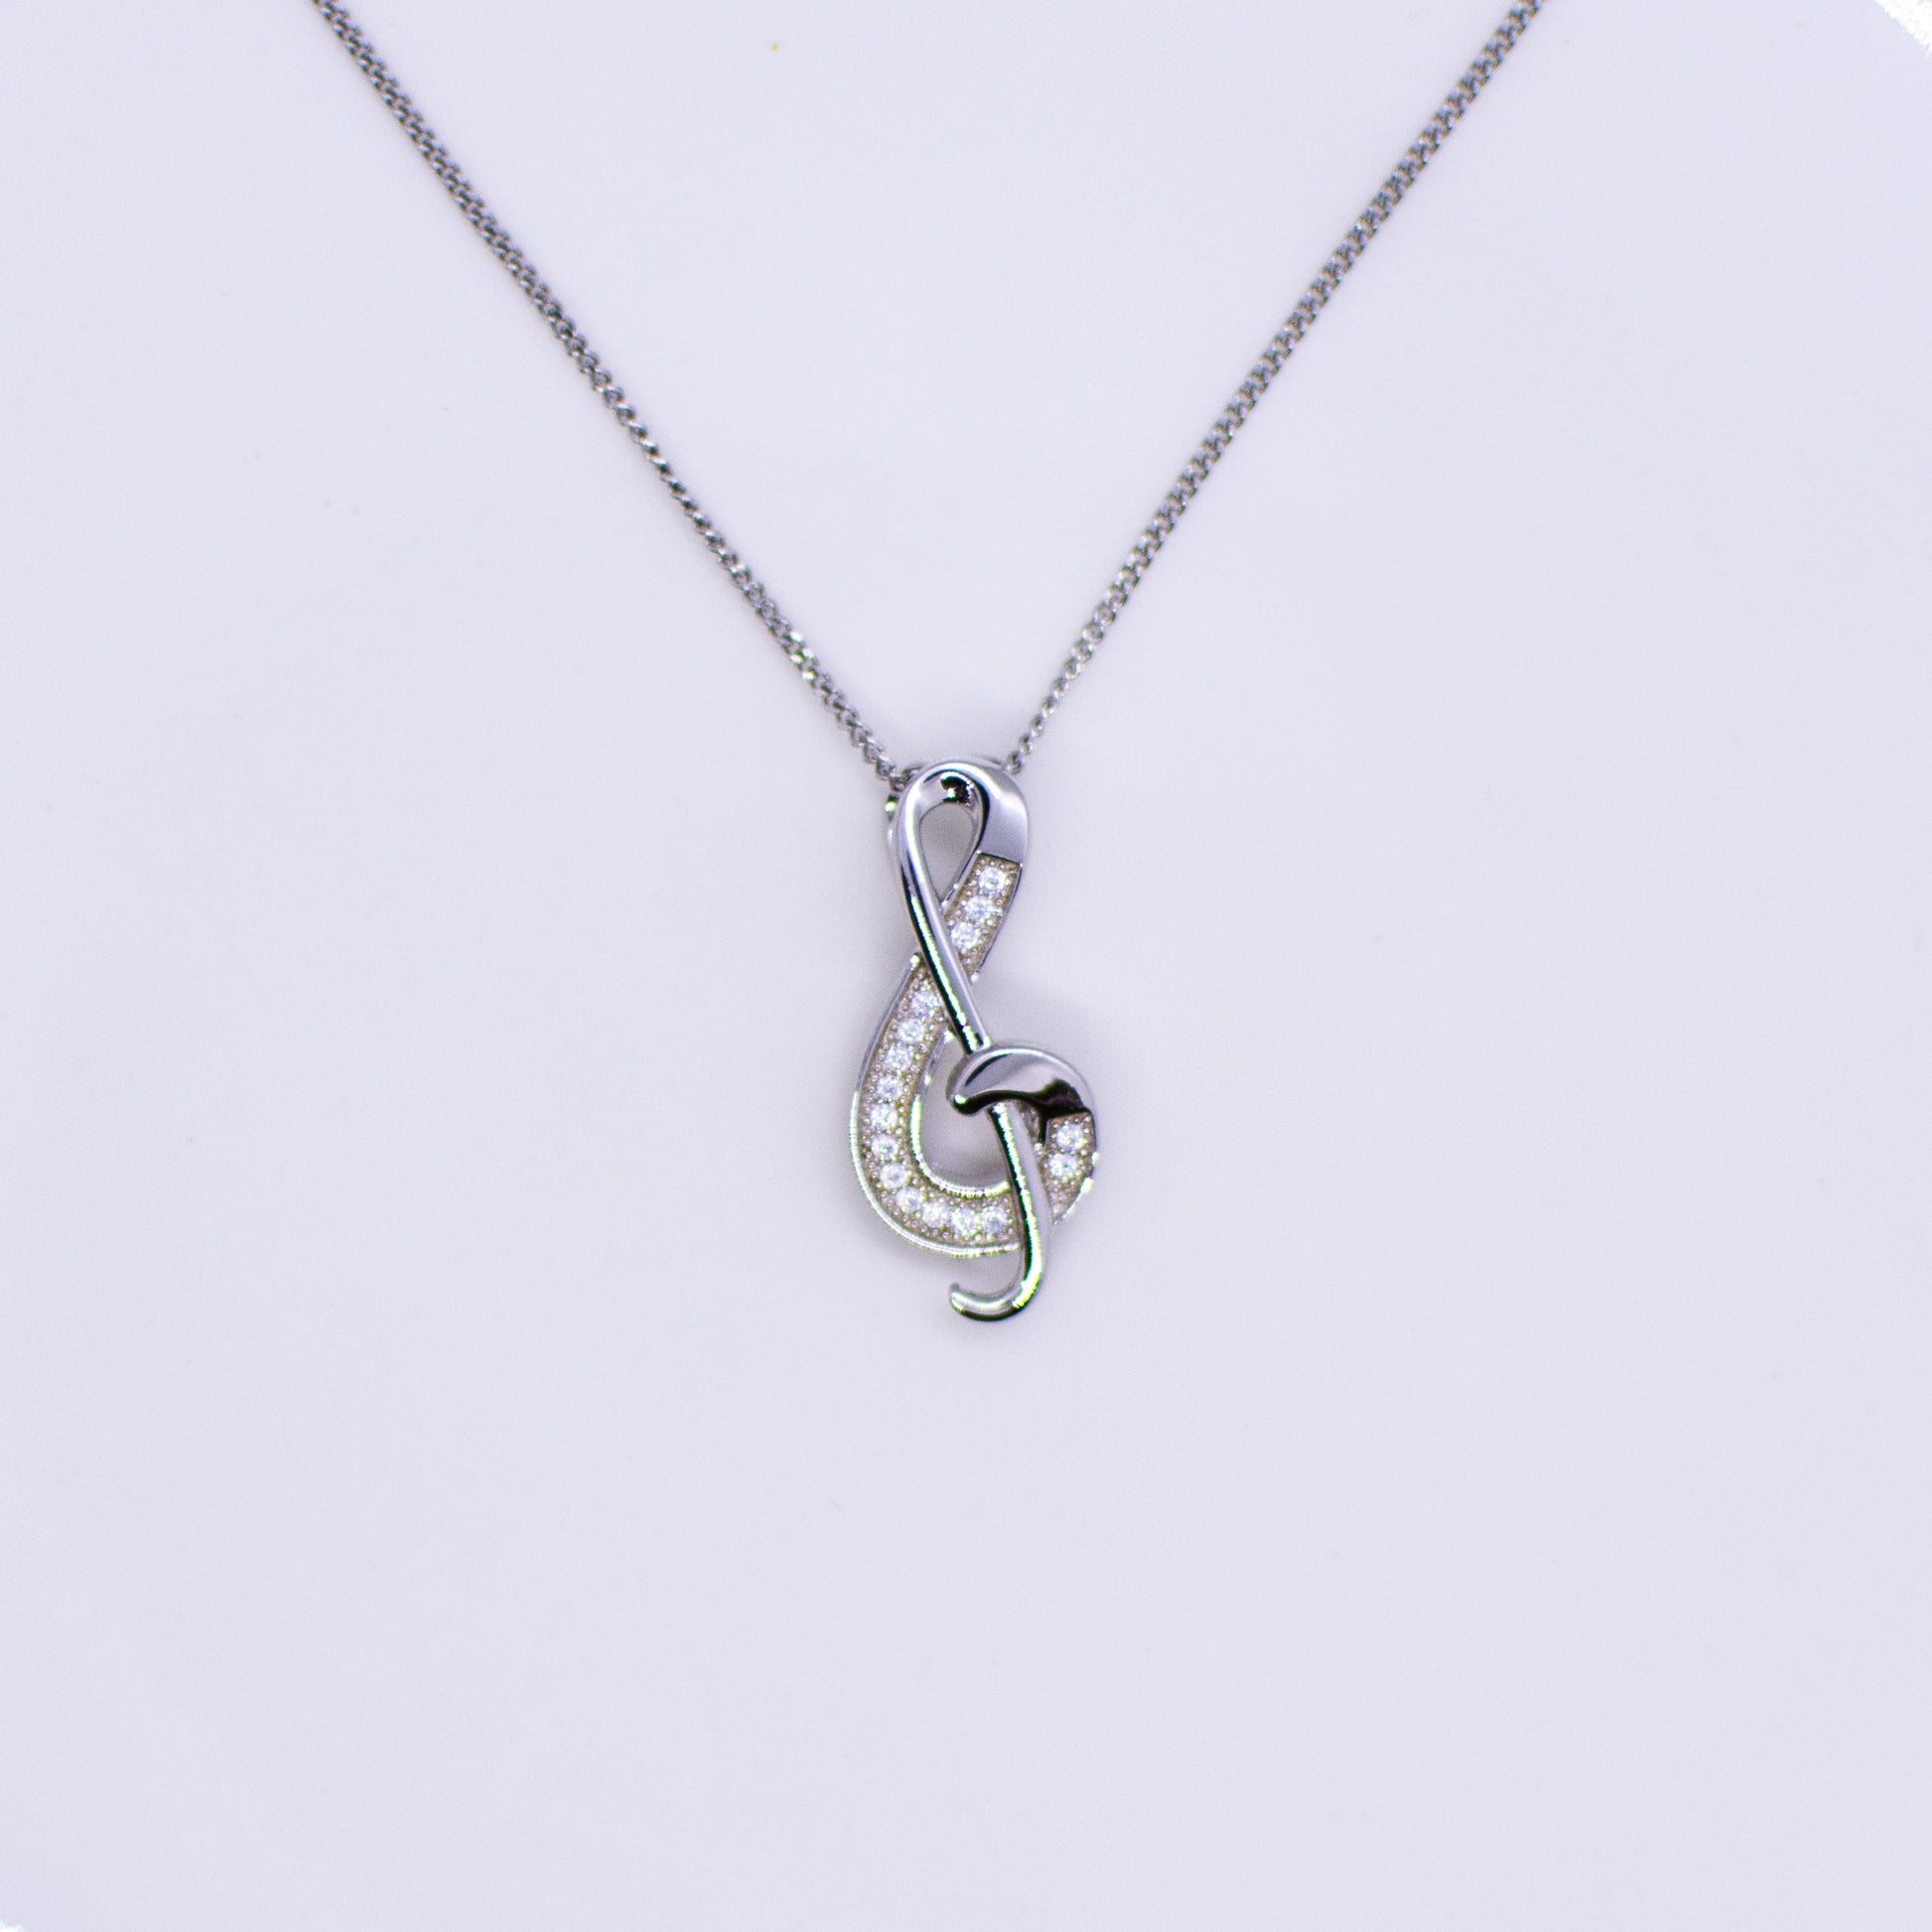 Silver CZ set Treble Clef slider pendant and chain This pretty Treble Clef is set with with glittering cubic zirconia stones.  An ideal necklace choice for music lovers of all ages. Product details: Product materials: 925 sterling silver, cubic zirconia Pendant dimensions:  22mm L x 9mm W Chain length: 44cm fine diamond cut curb chain